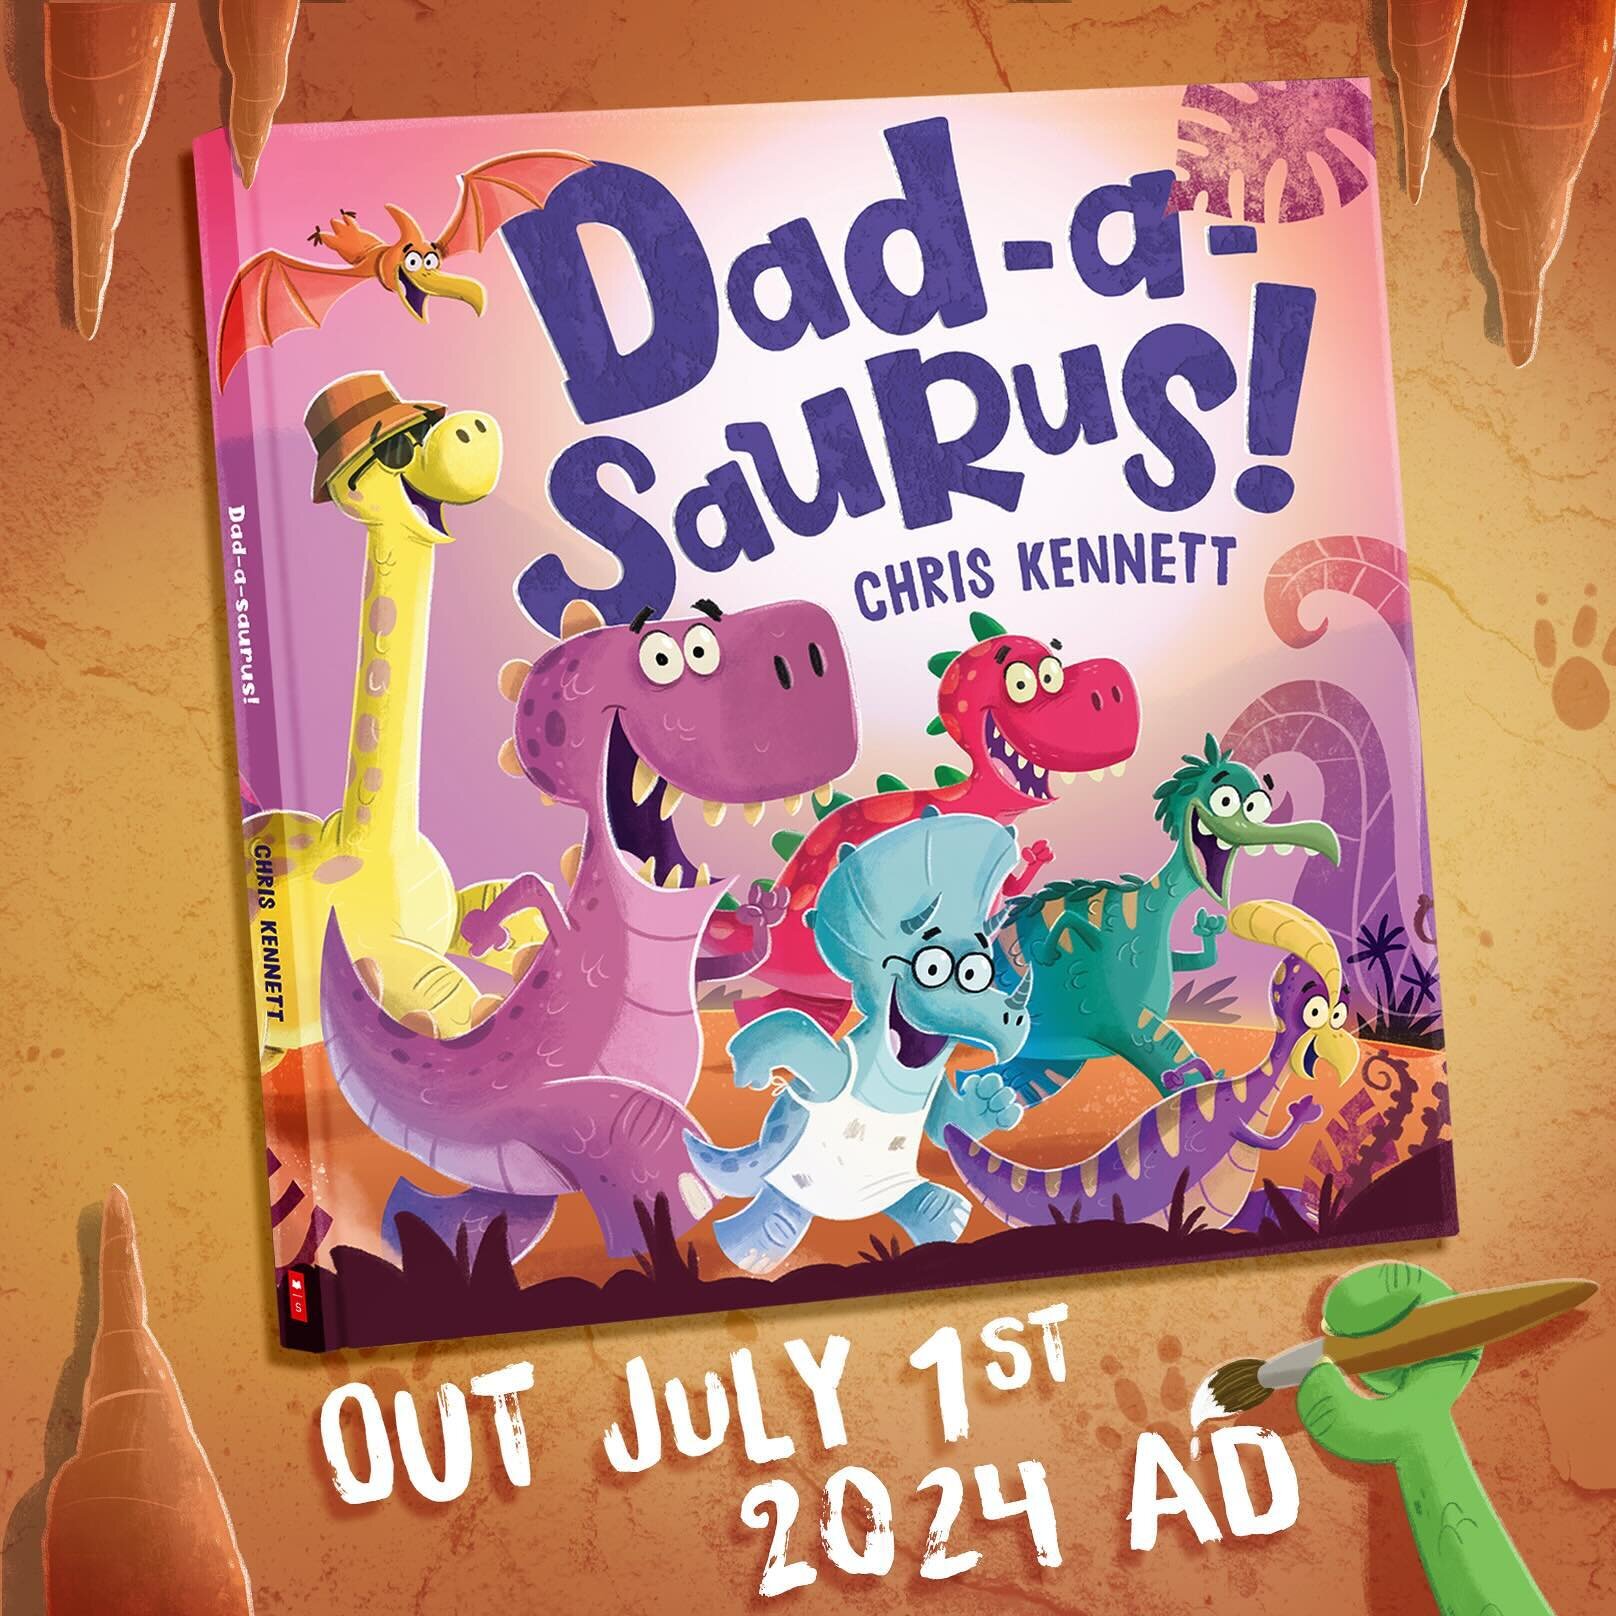 What&rsquo;s this? Another cover reveal?! You betcha! 

DAD-A-SAURUS! Is my very own picture book with @scholastic_au coming out July 1st, just in time for Fathers Day!

Dad-a-saurs play all sorts of roles in their young Dino&rsquo;s lives. Making pa